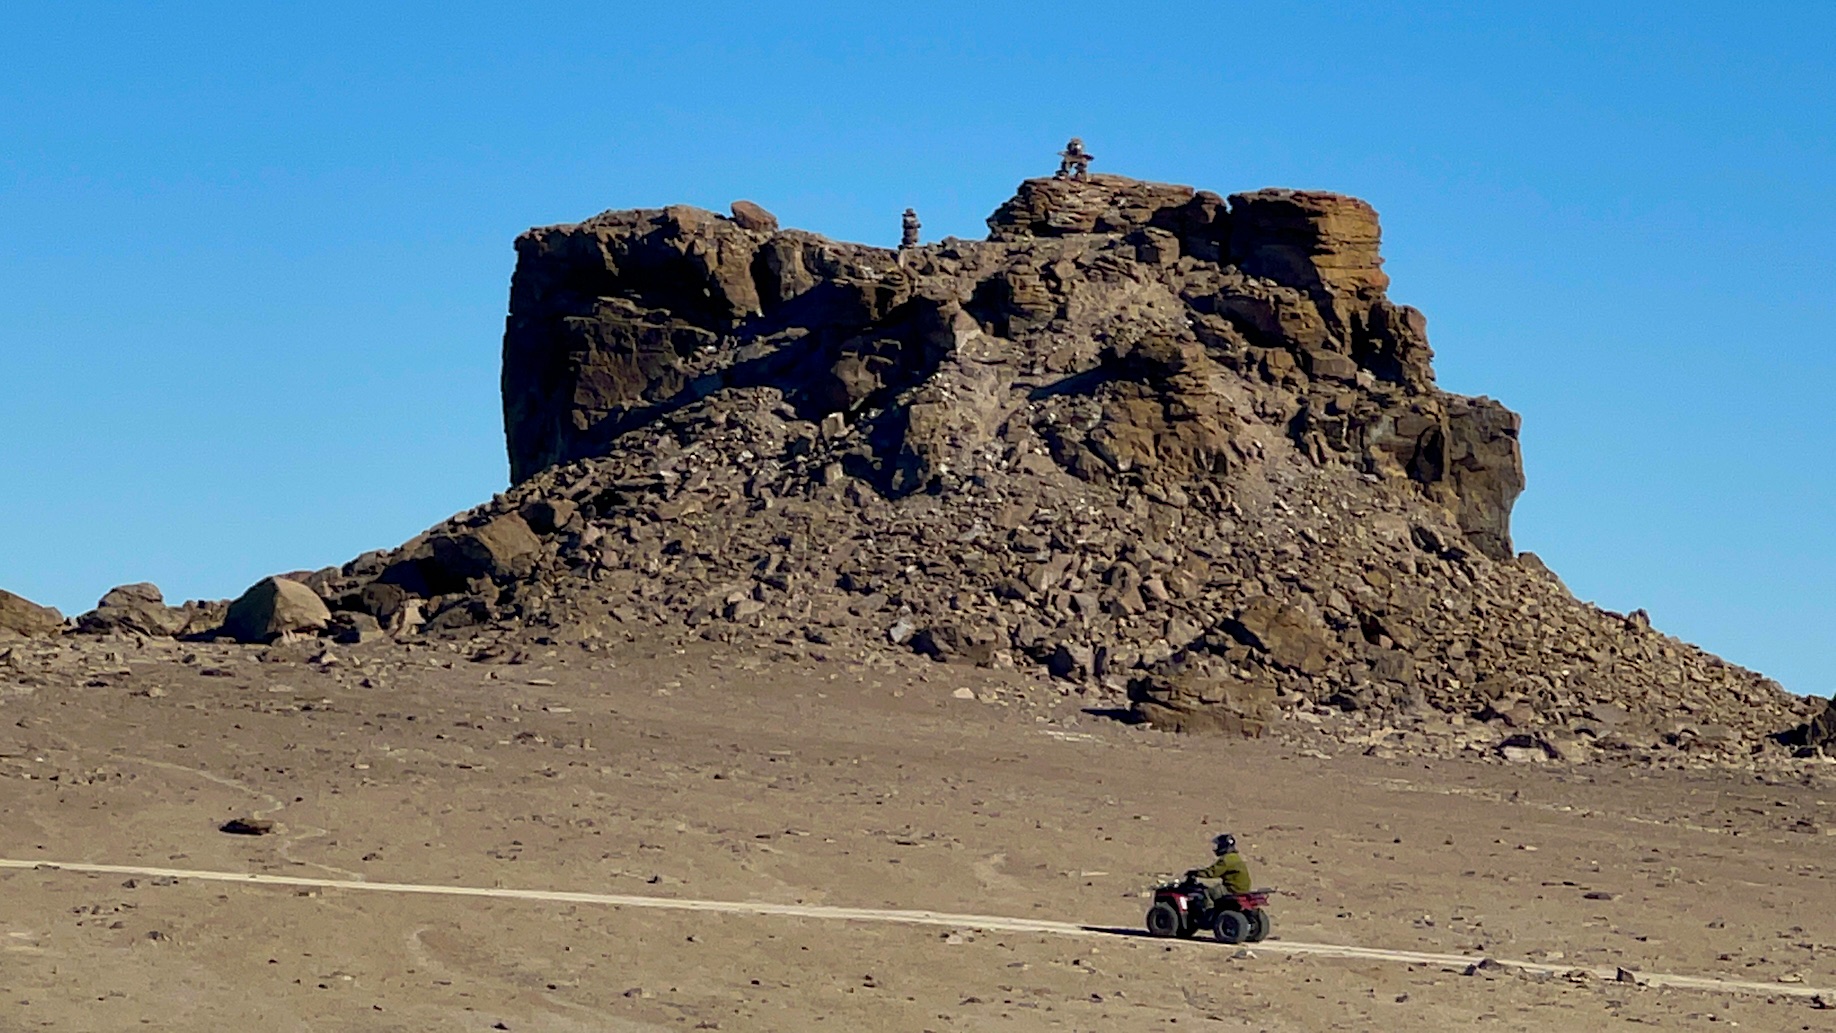 A person on an ATV rides in front of a large, rectangular rock formation with clear blue skies overhead.